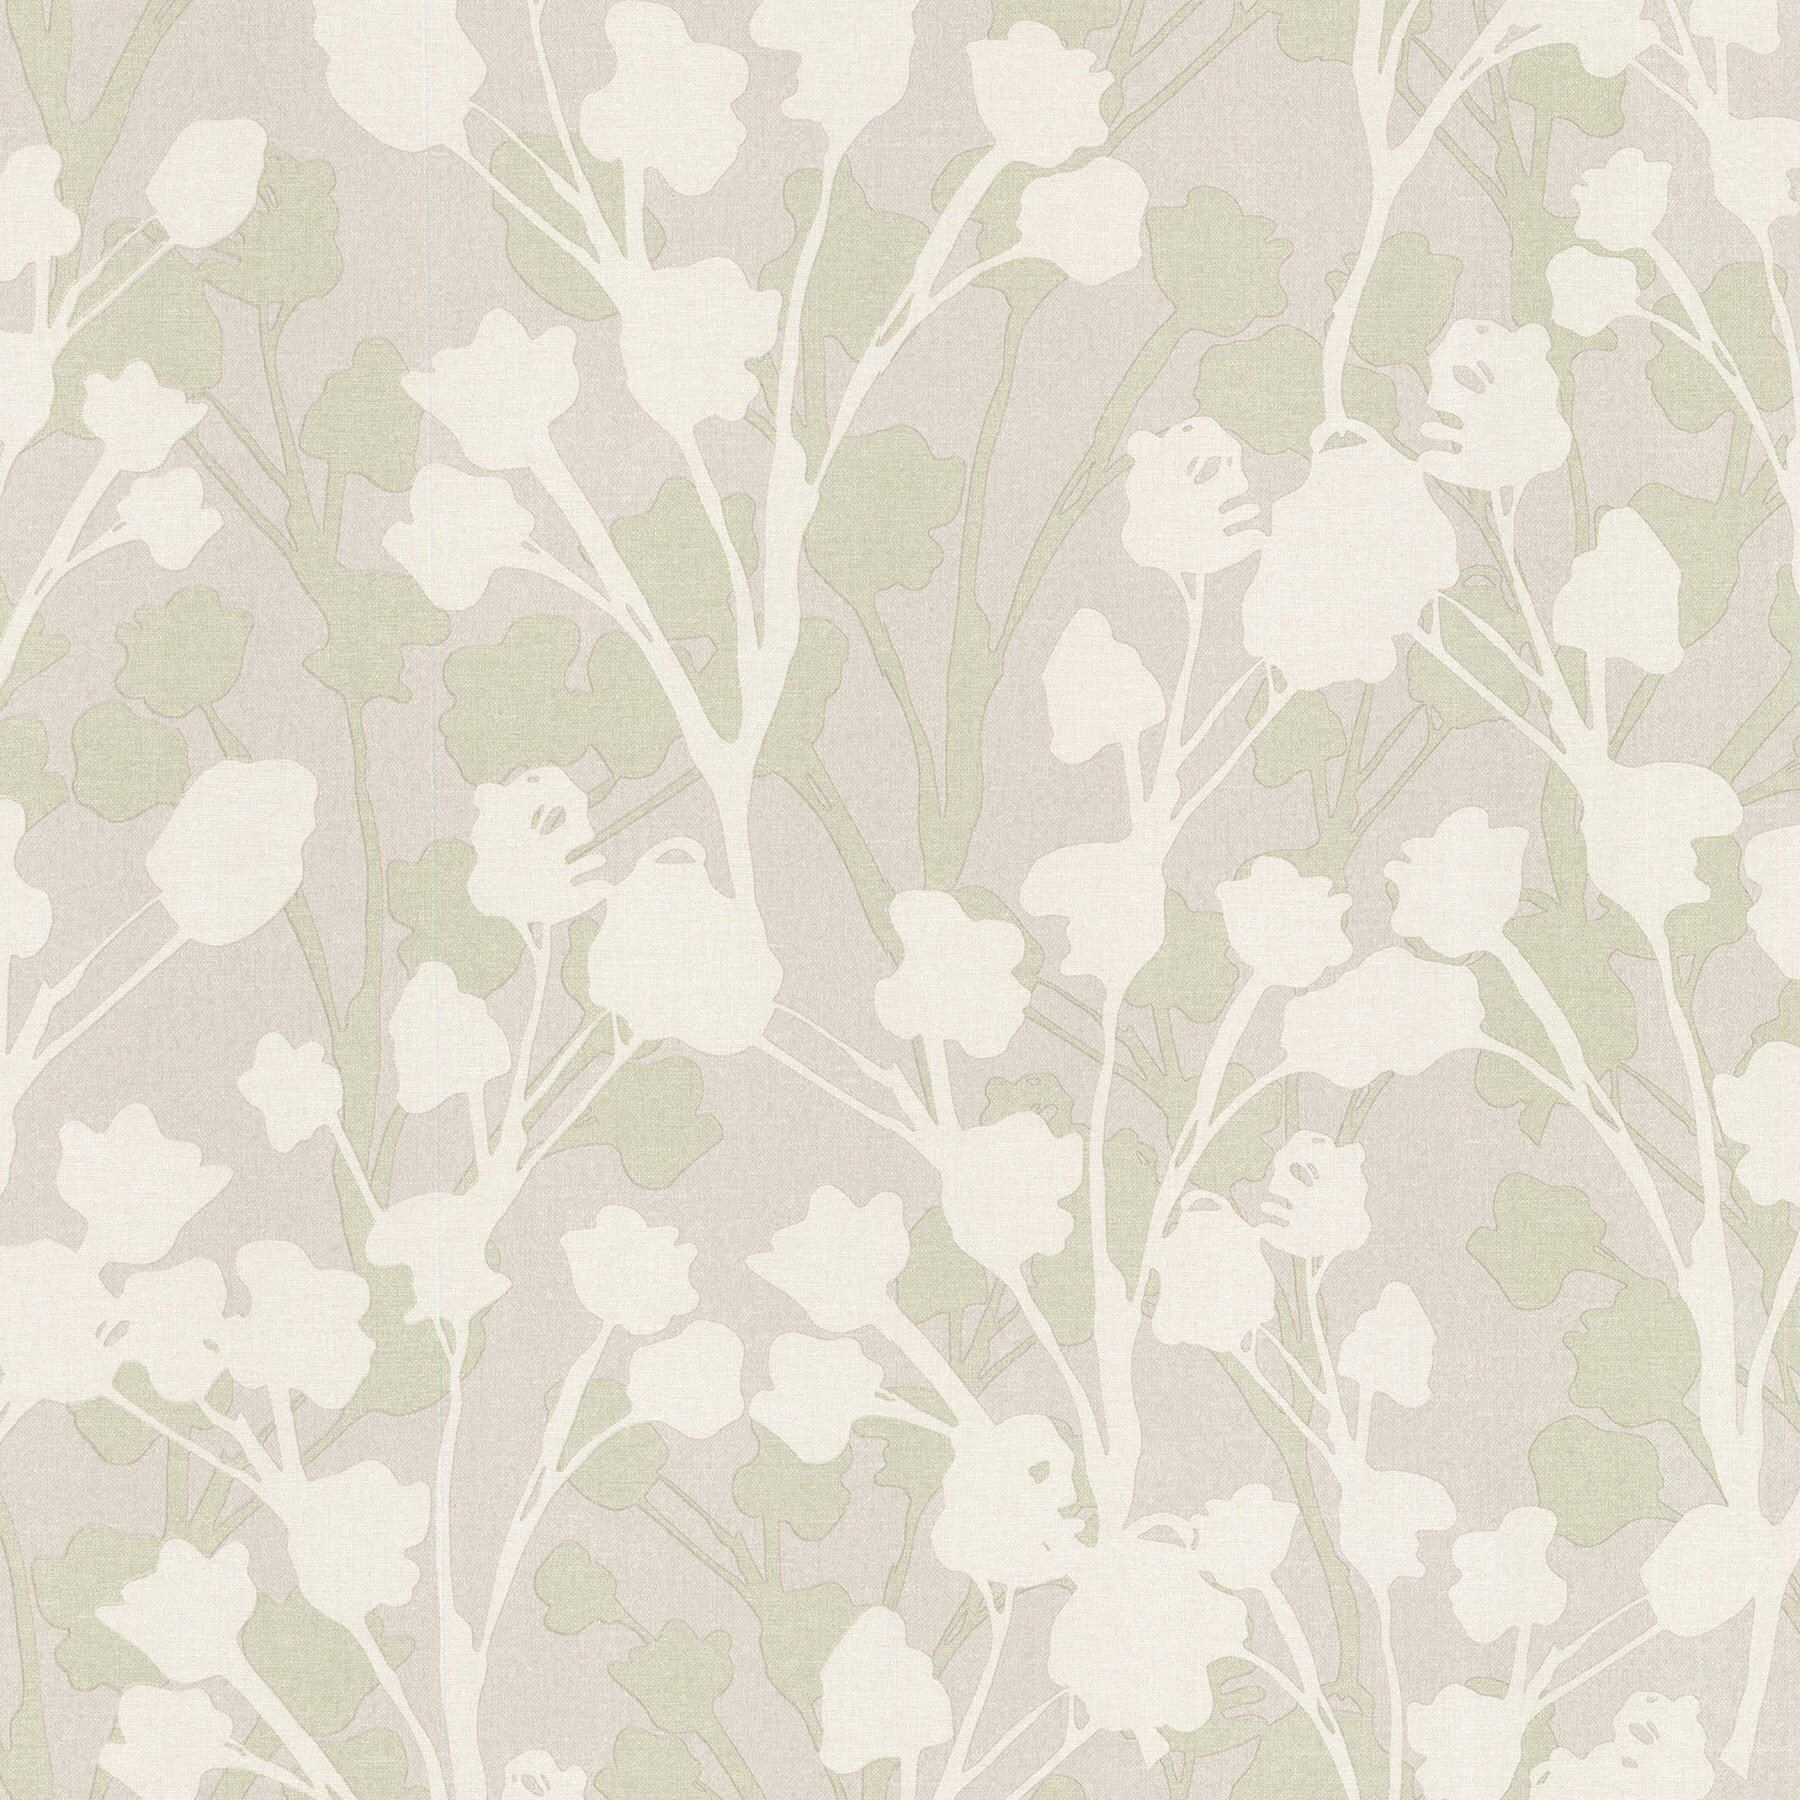 Brewster Kitchen And Bath Resource III 56 Sq Ft Cream Vinyl Floral Prepasted Wallpaper At Lowes.com